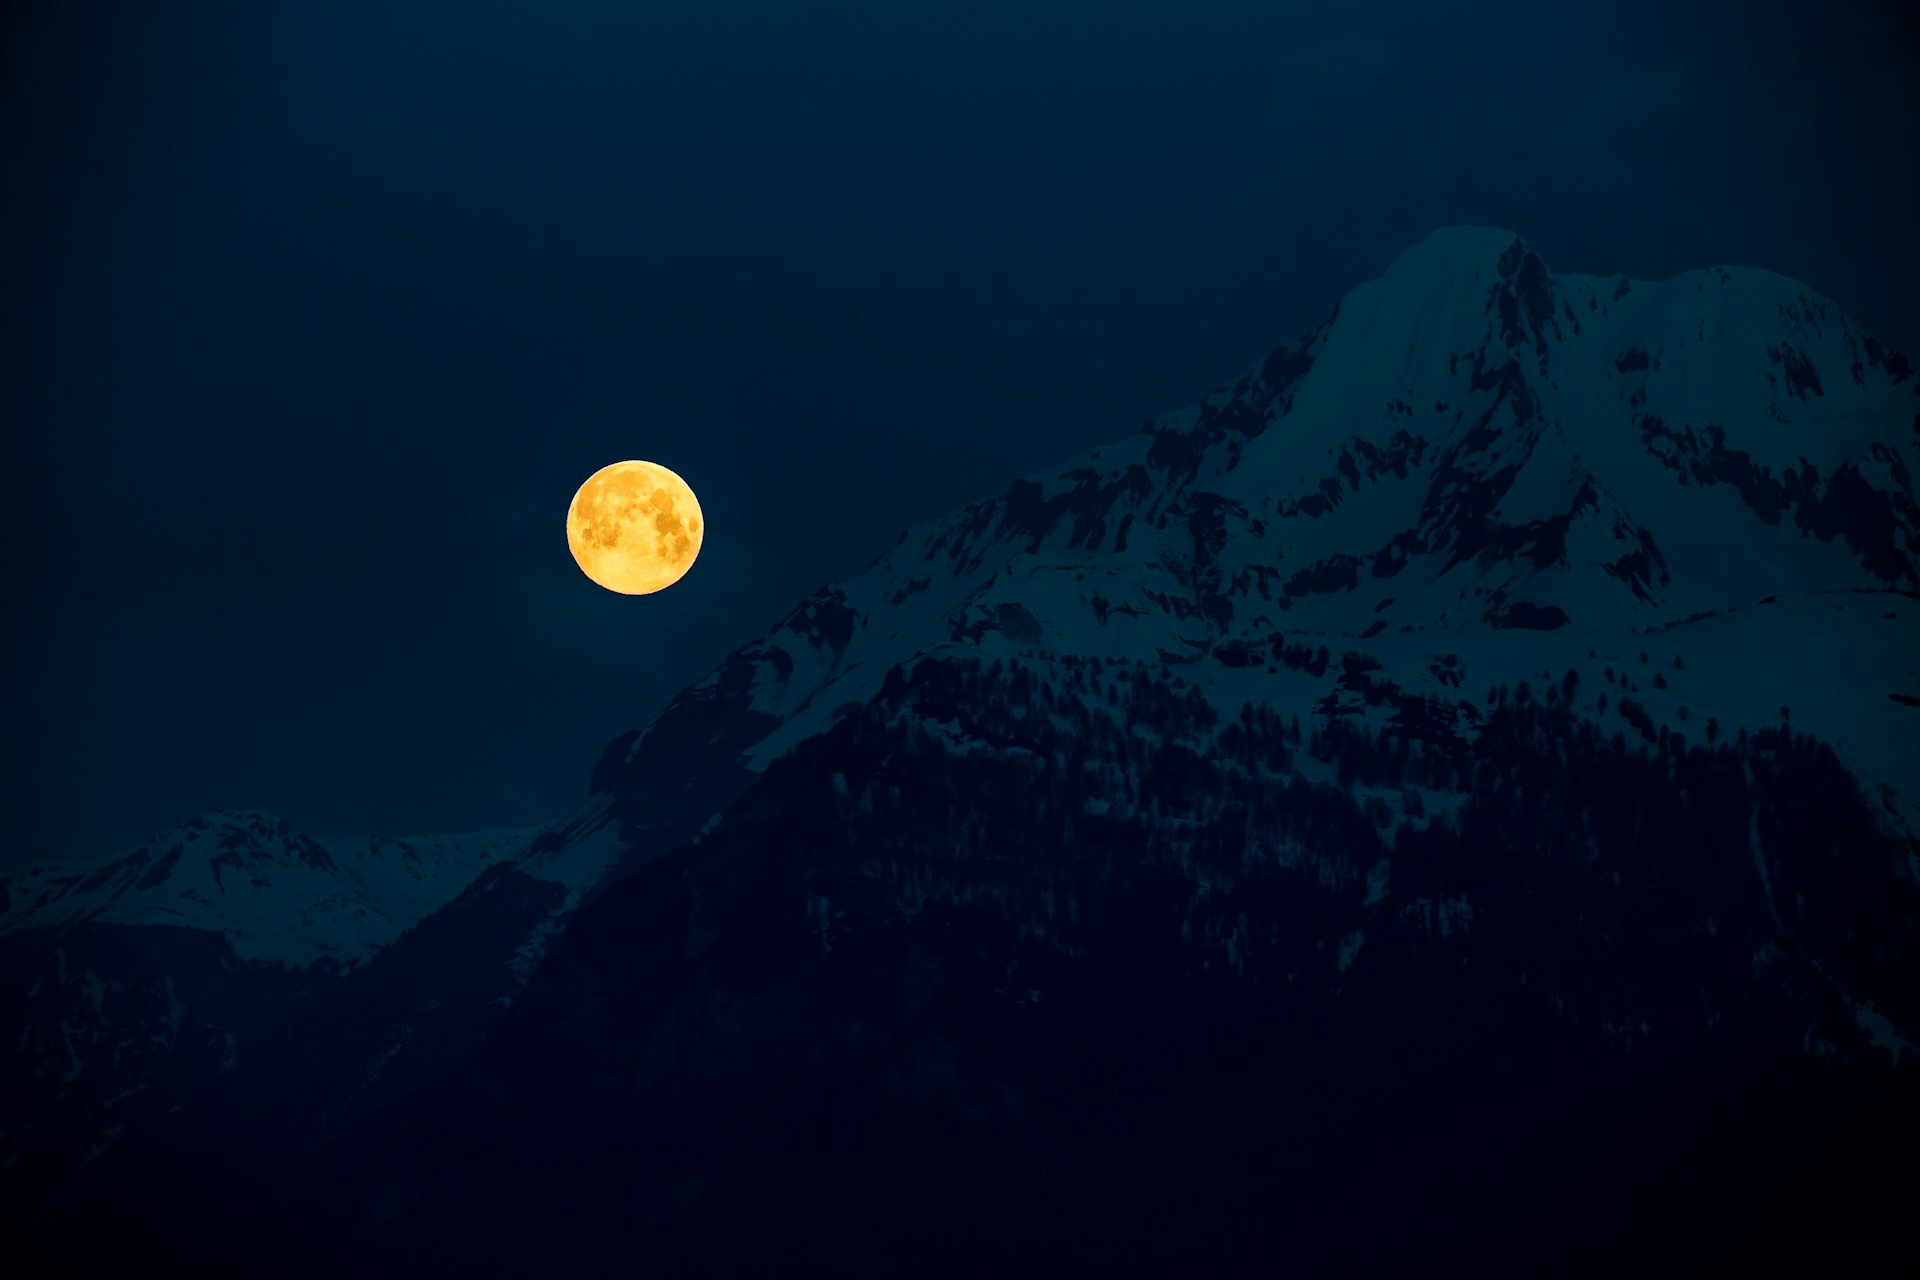 moon and mountain